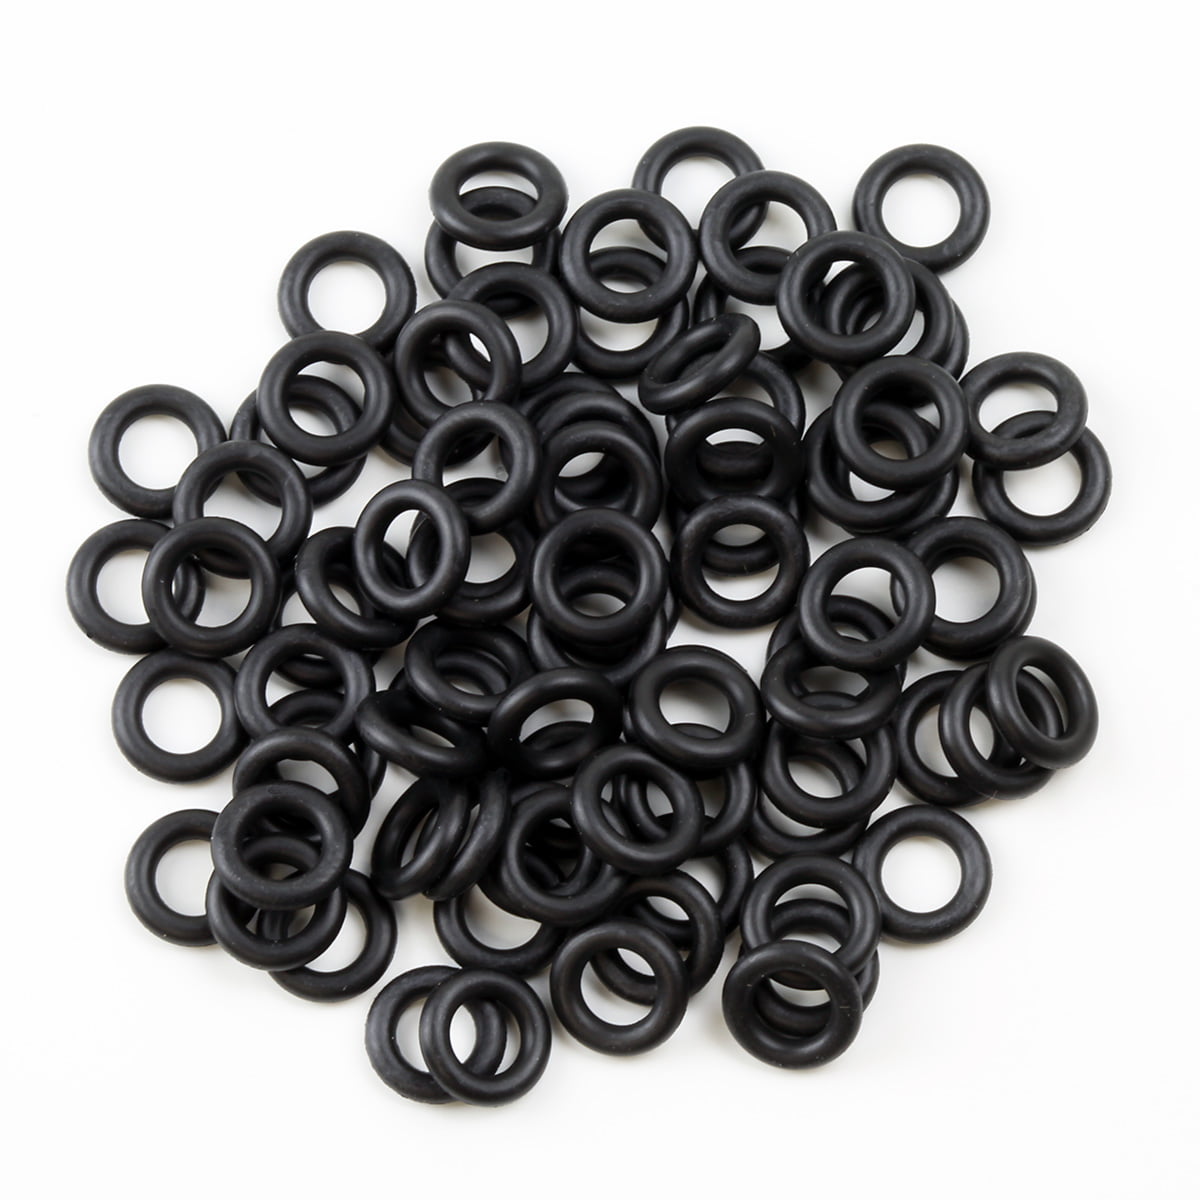 Viton Heat Resistant Brown O-rings  Size 025 Price for 10 pcs 